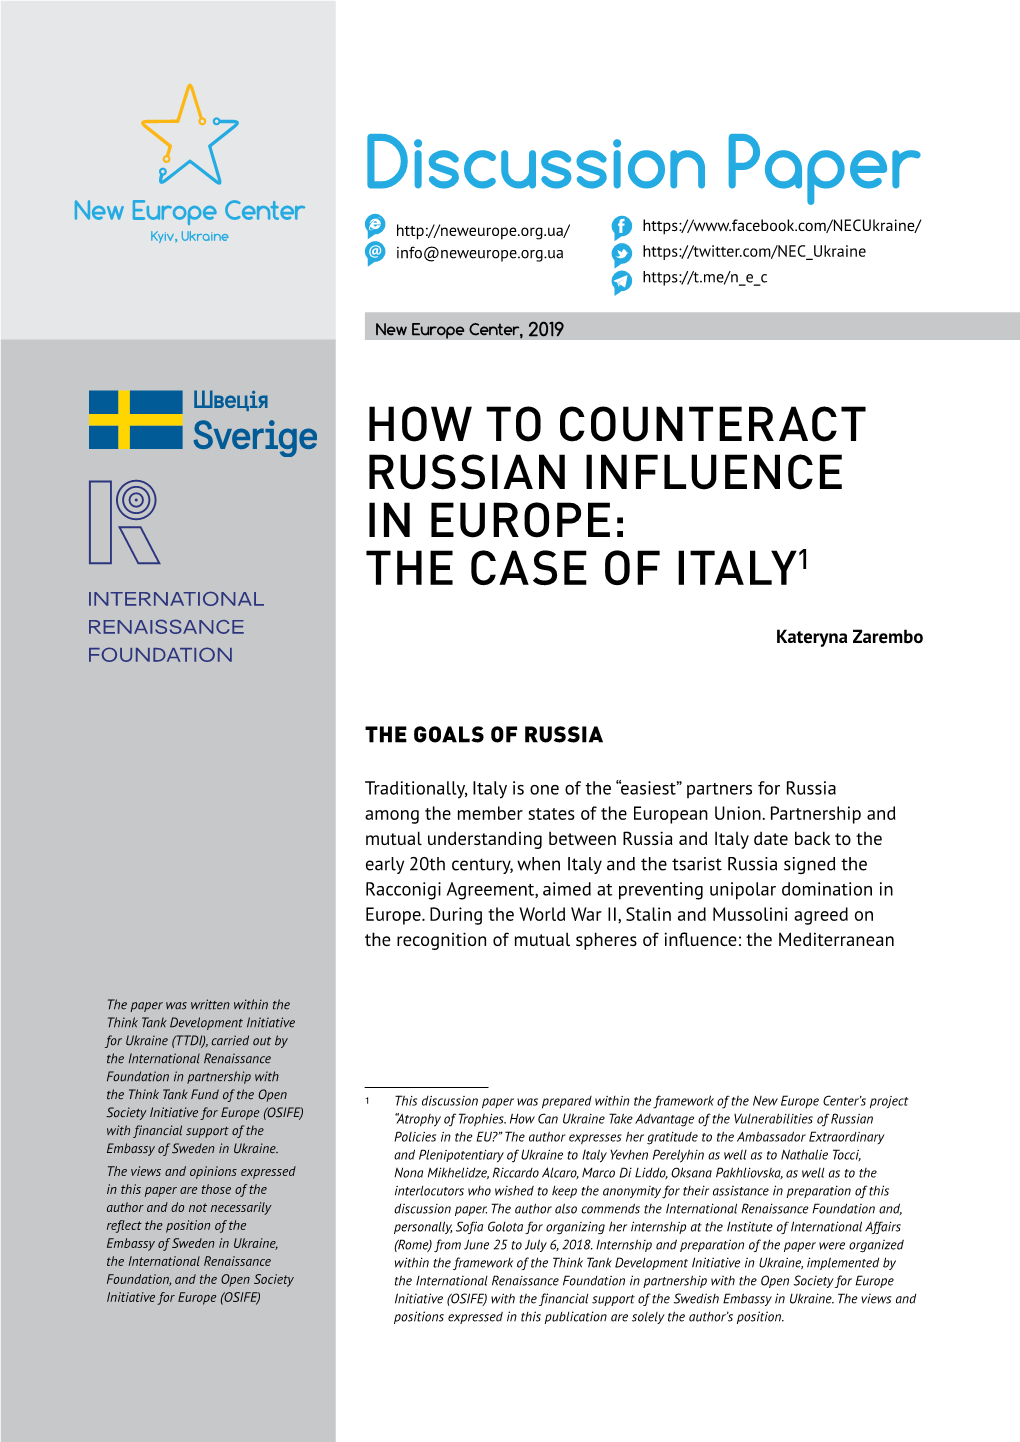 How to Counteract Russian Influence in Europe: the Case of Italy1